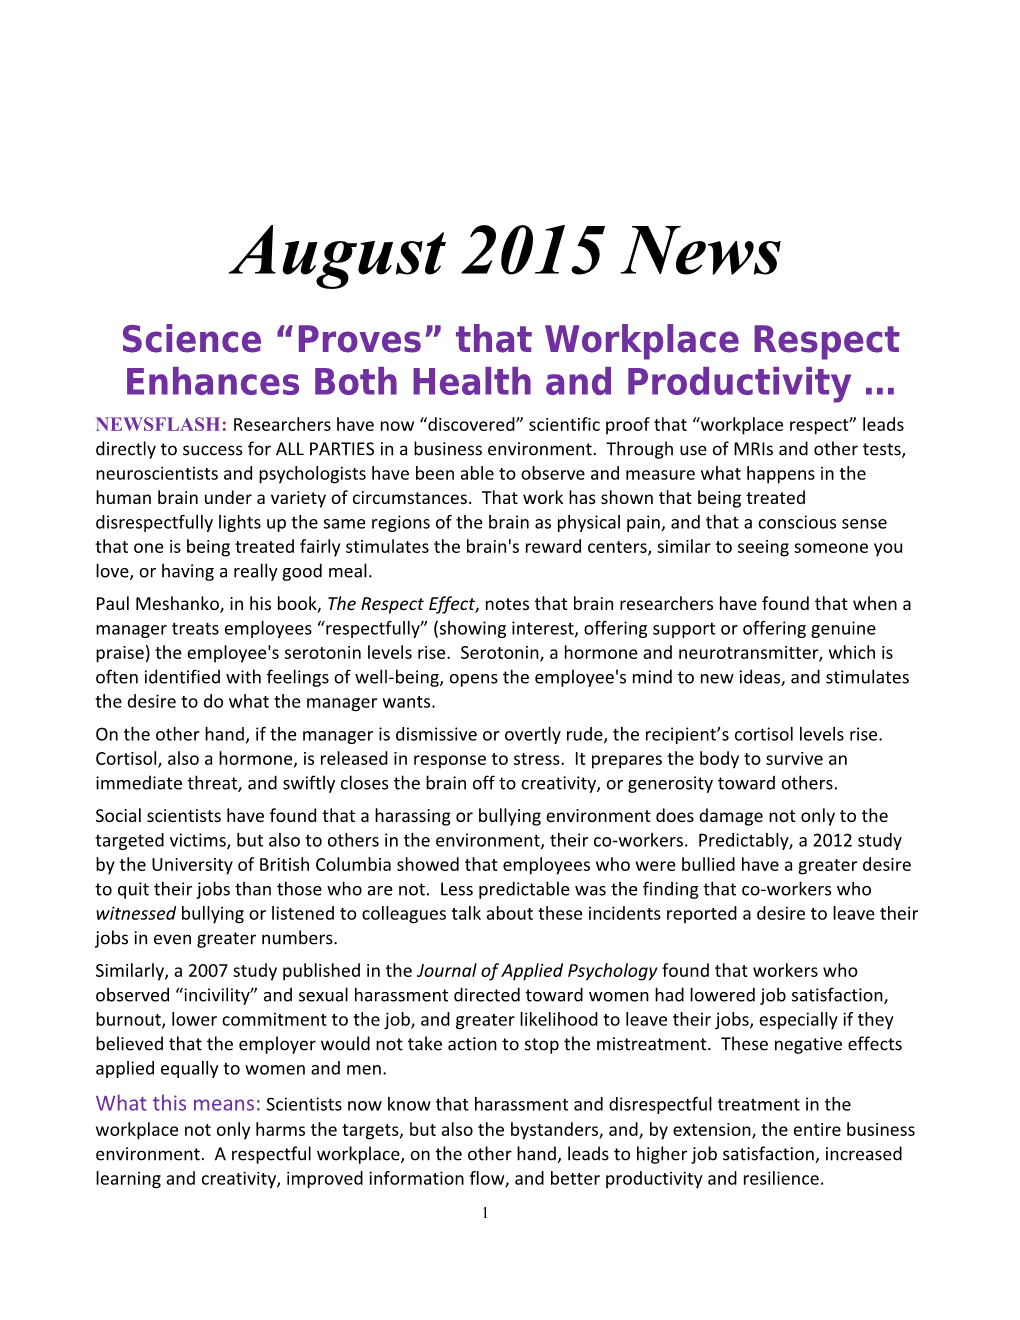 Science Proves That Workplace Respect Enhances Bothhealth and Productivity